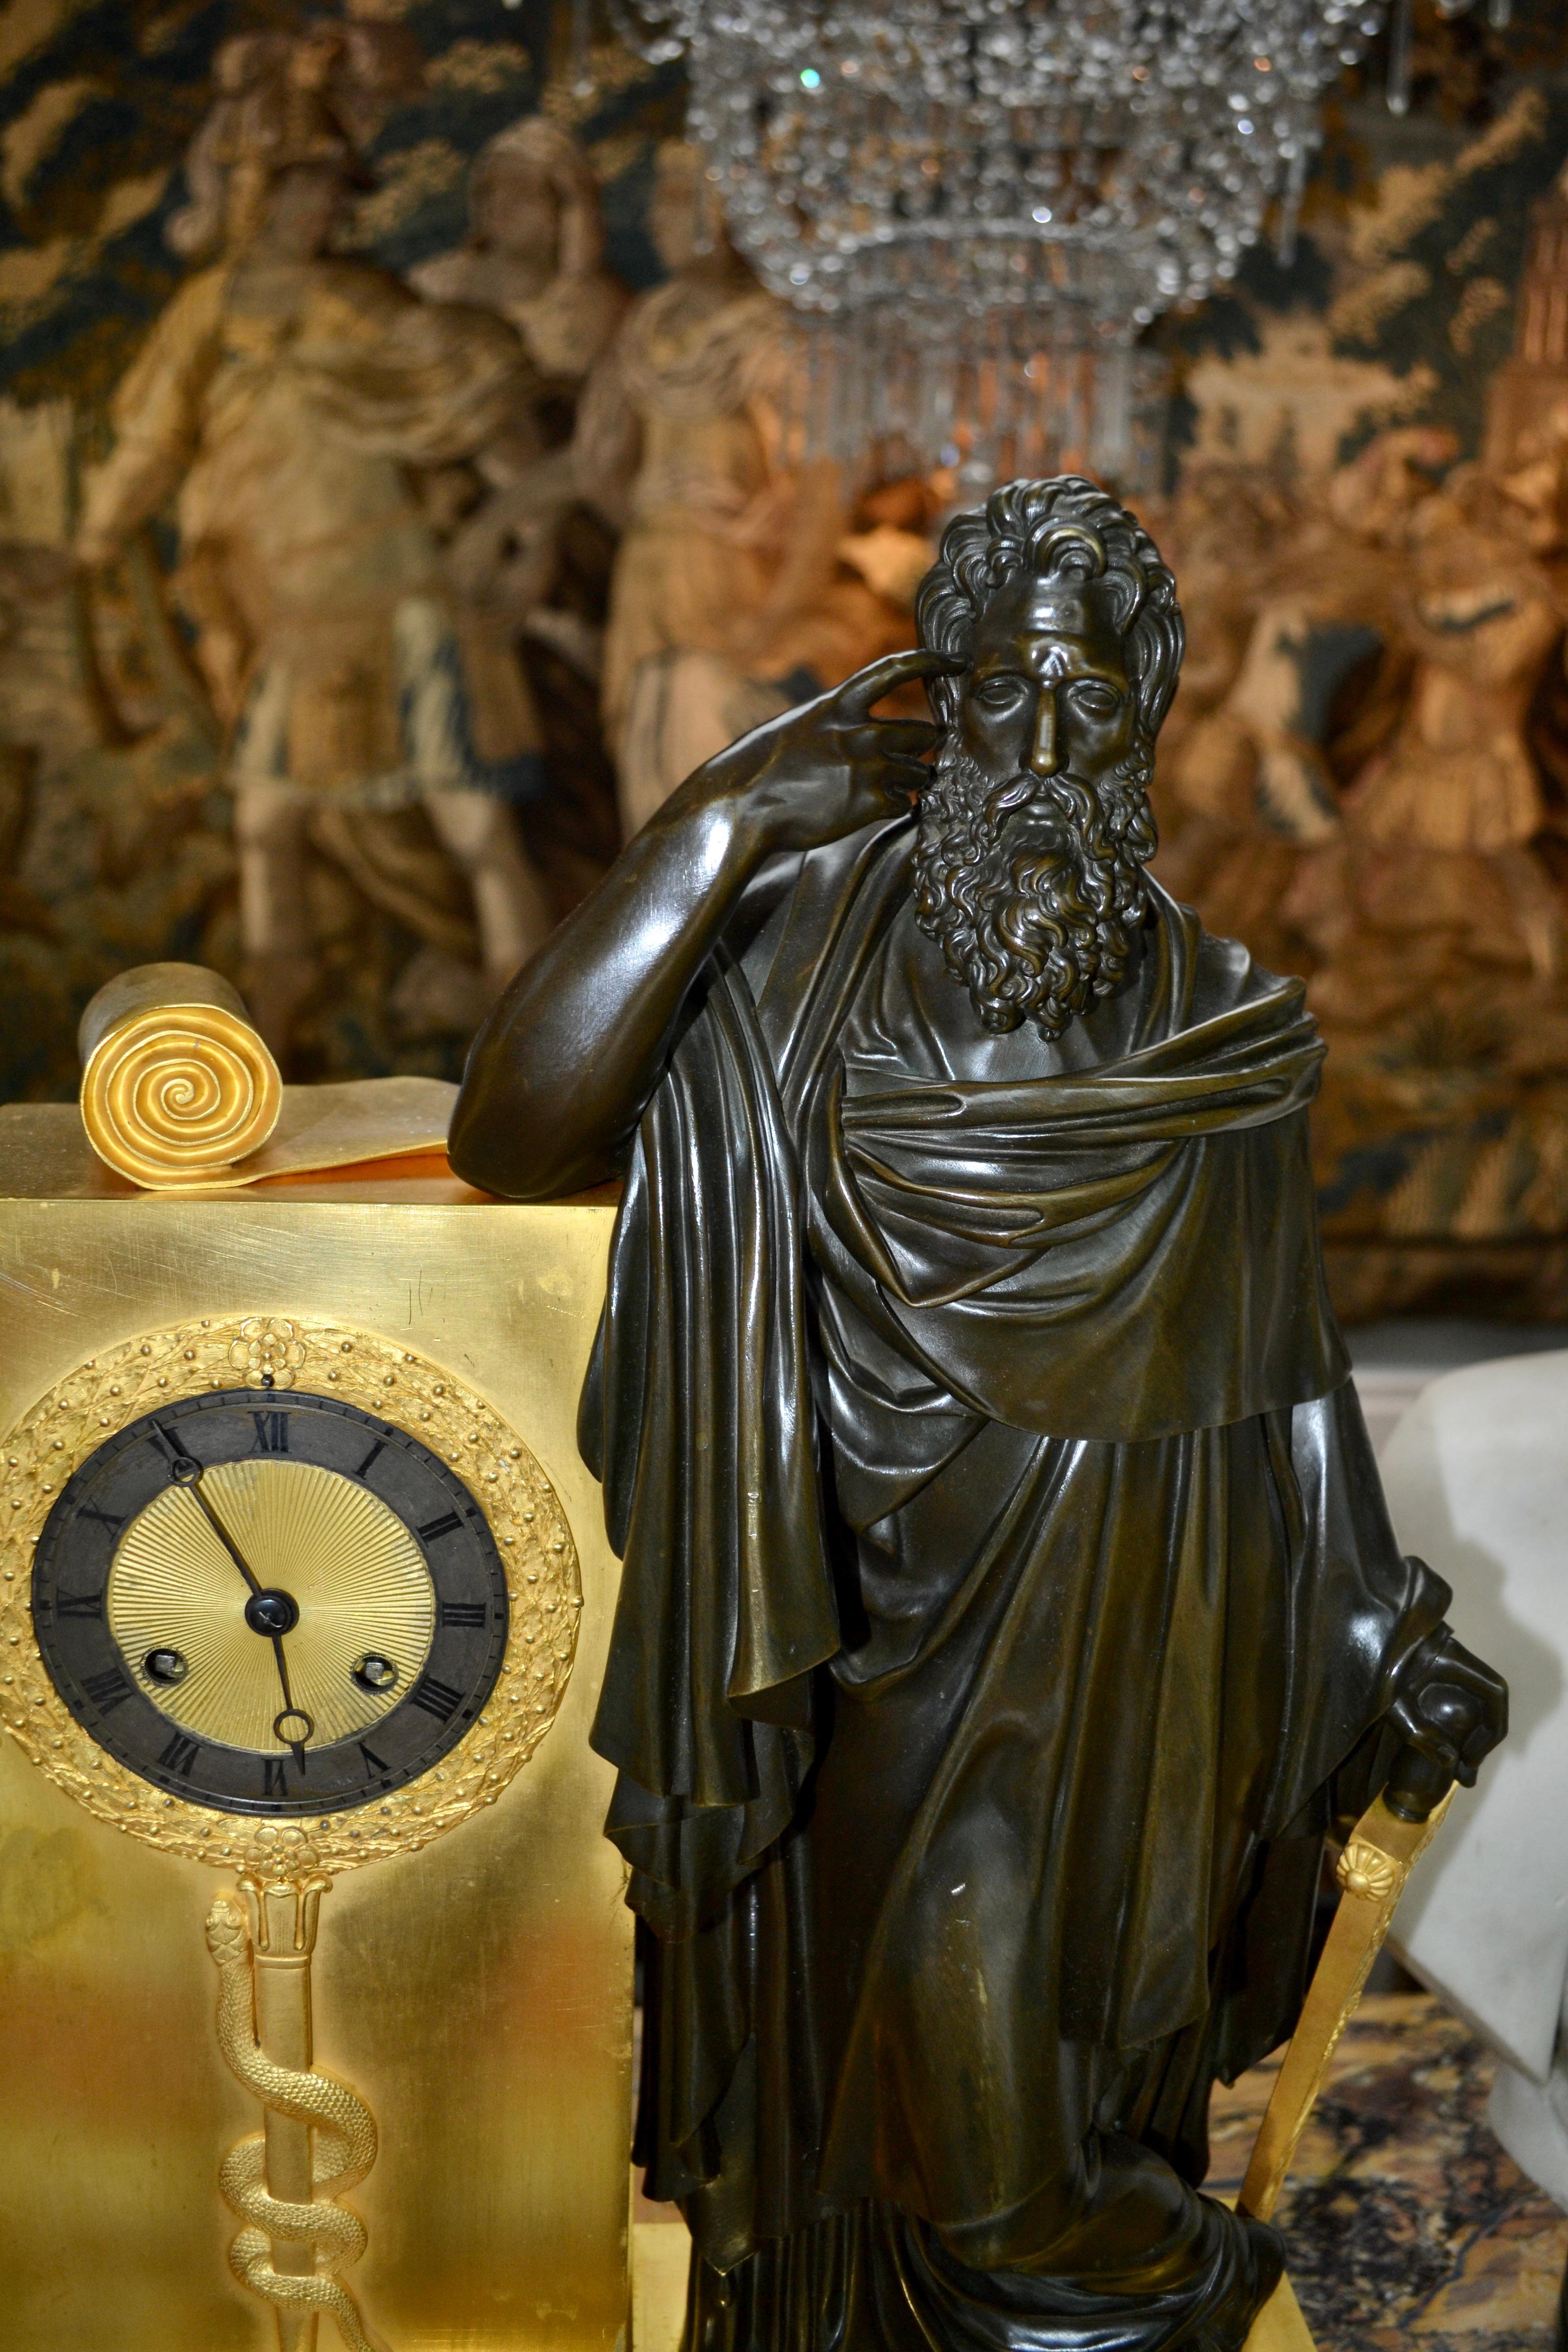  French Empire Figural Bronze Clock Depicting an Allegory to Prudence or Wisdom For Sale 7